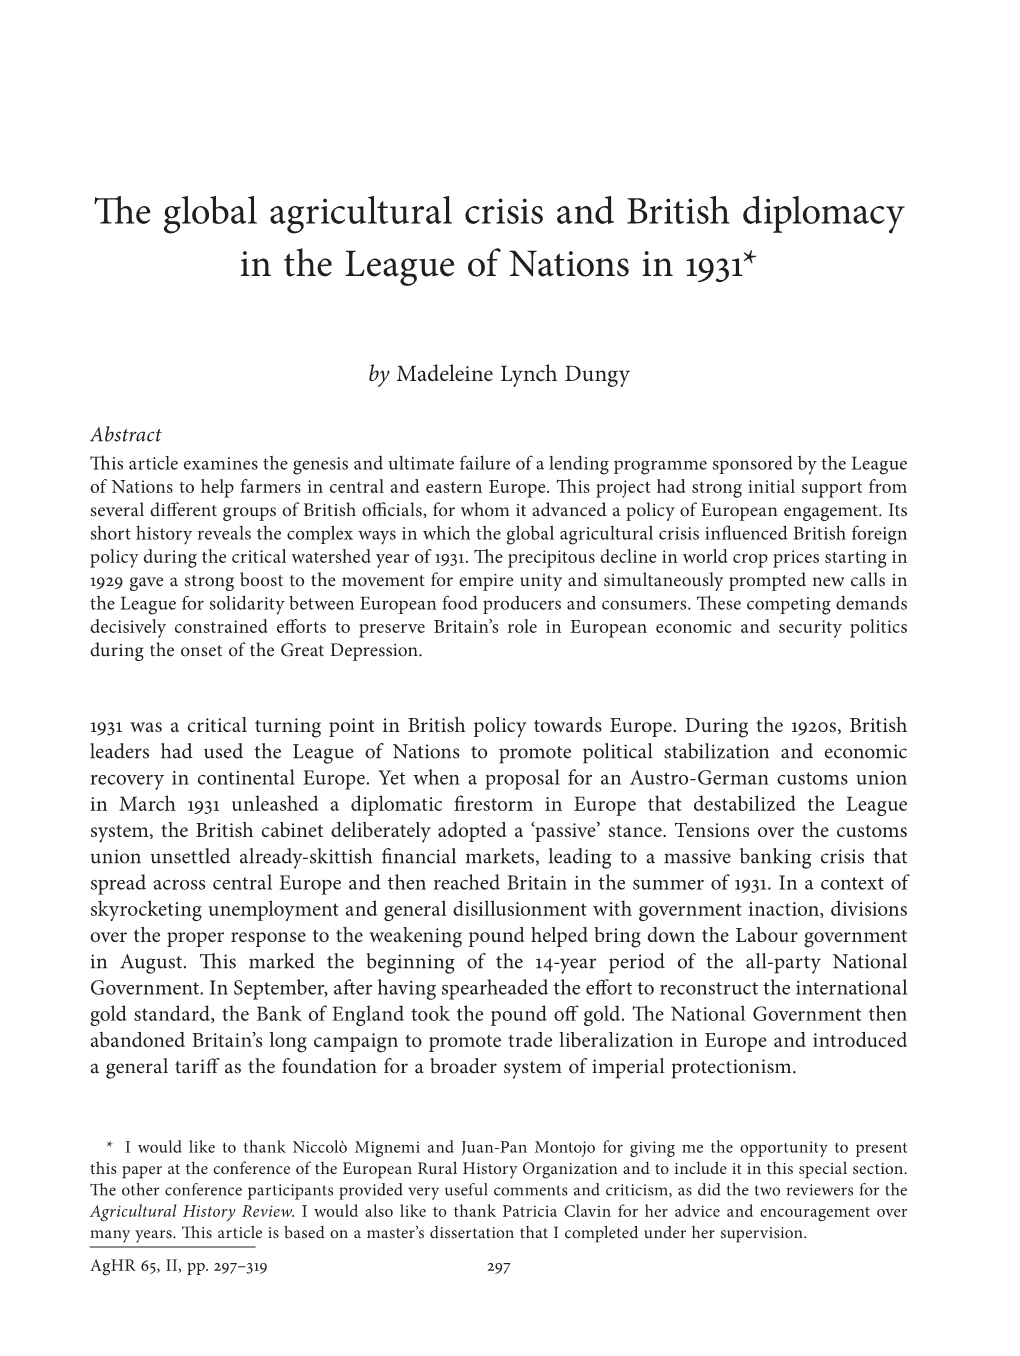 The Global Agricultural Crisis and British Diplomacy in the League of Nations in 1931*